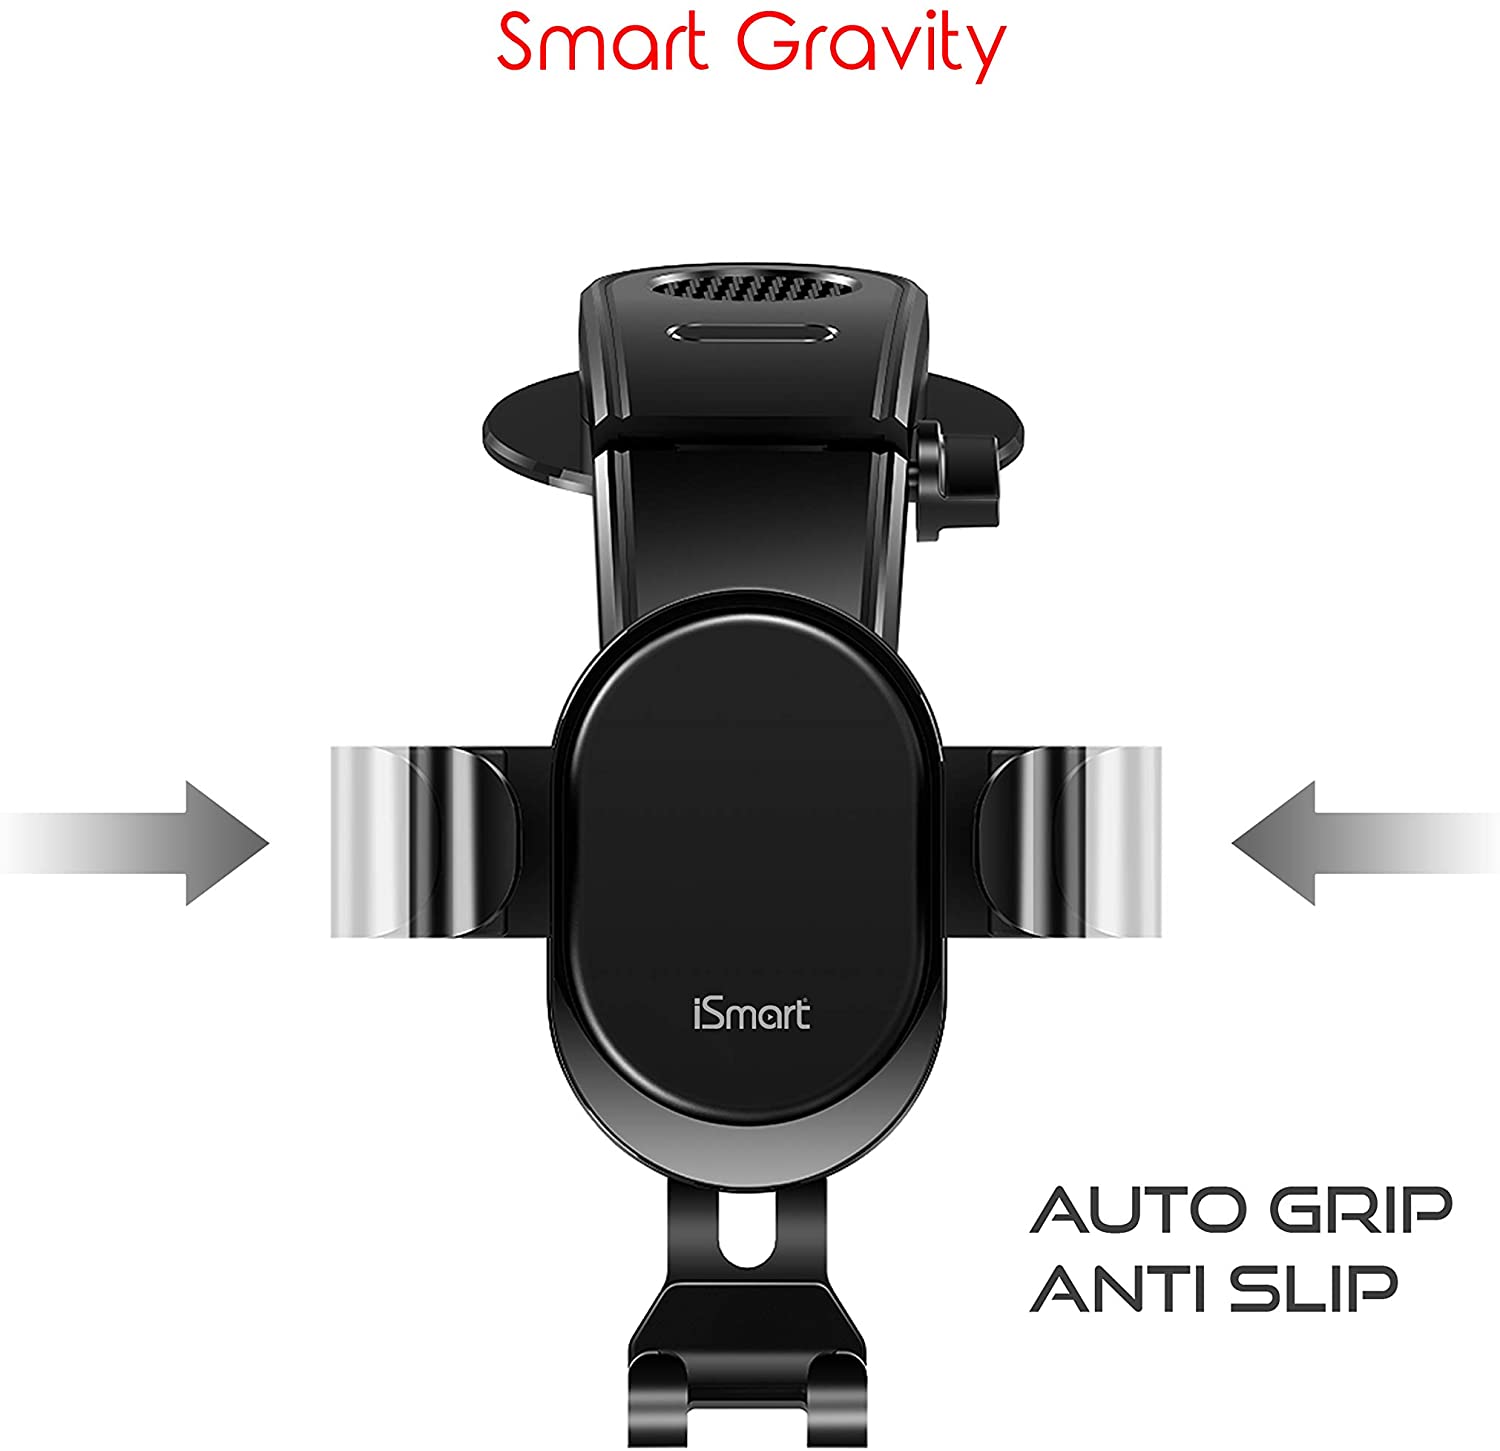 iSmart Apple Authorised Reseller - Buy Smart Watch for Stylish Look. Get  Airpods with Discount Price! ISmartAppleAuthorisedReseller Address :  https://bit.ly/3isyyuF (EVN RD, Erode) Ph: 70944 74444 / 70944 74448.  #smartwatch #watchseries #smartphone #